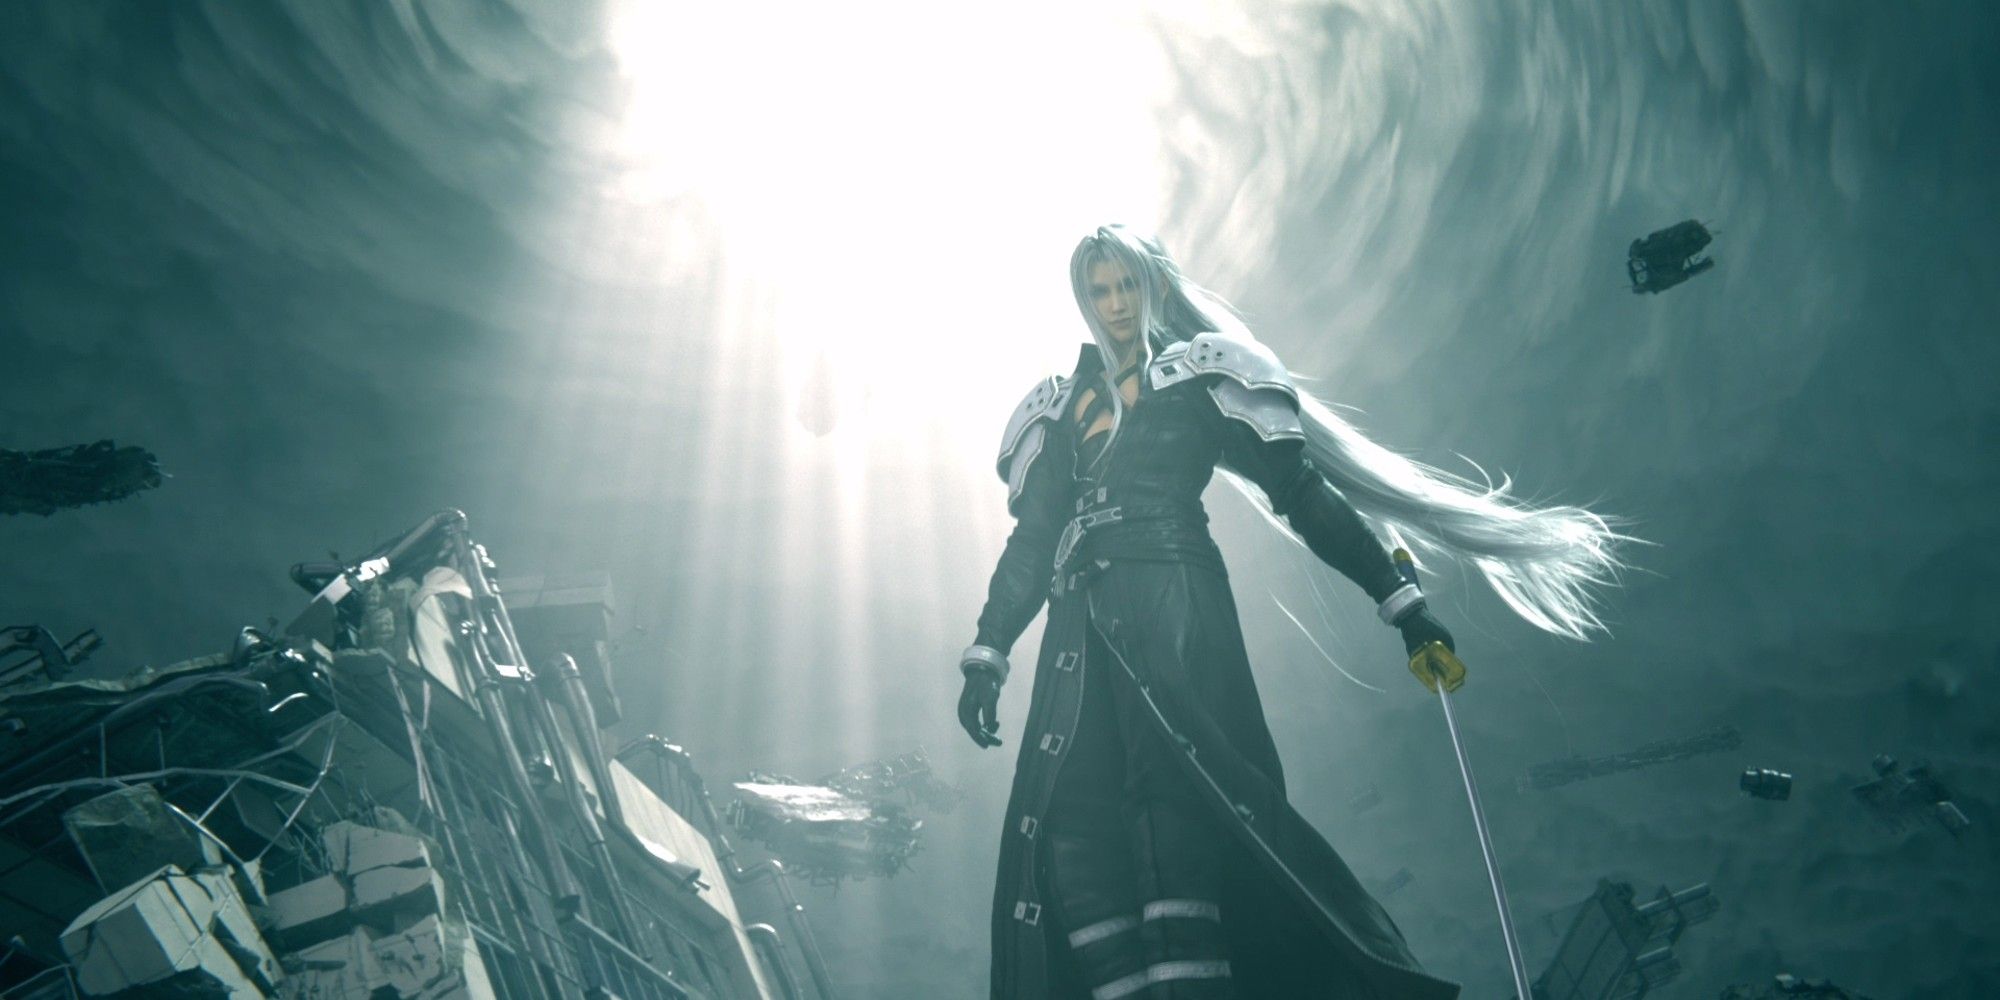 Sephiroth looks down from the high sky